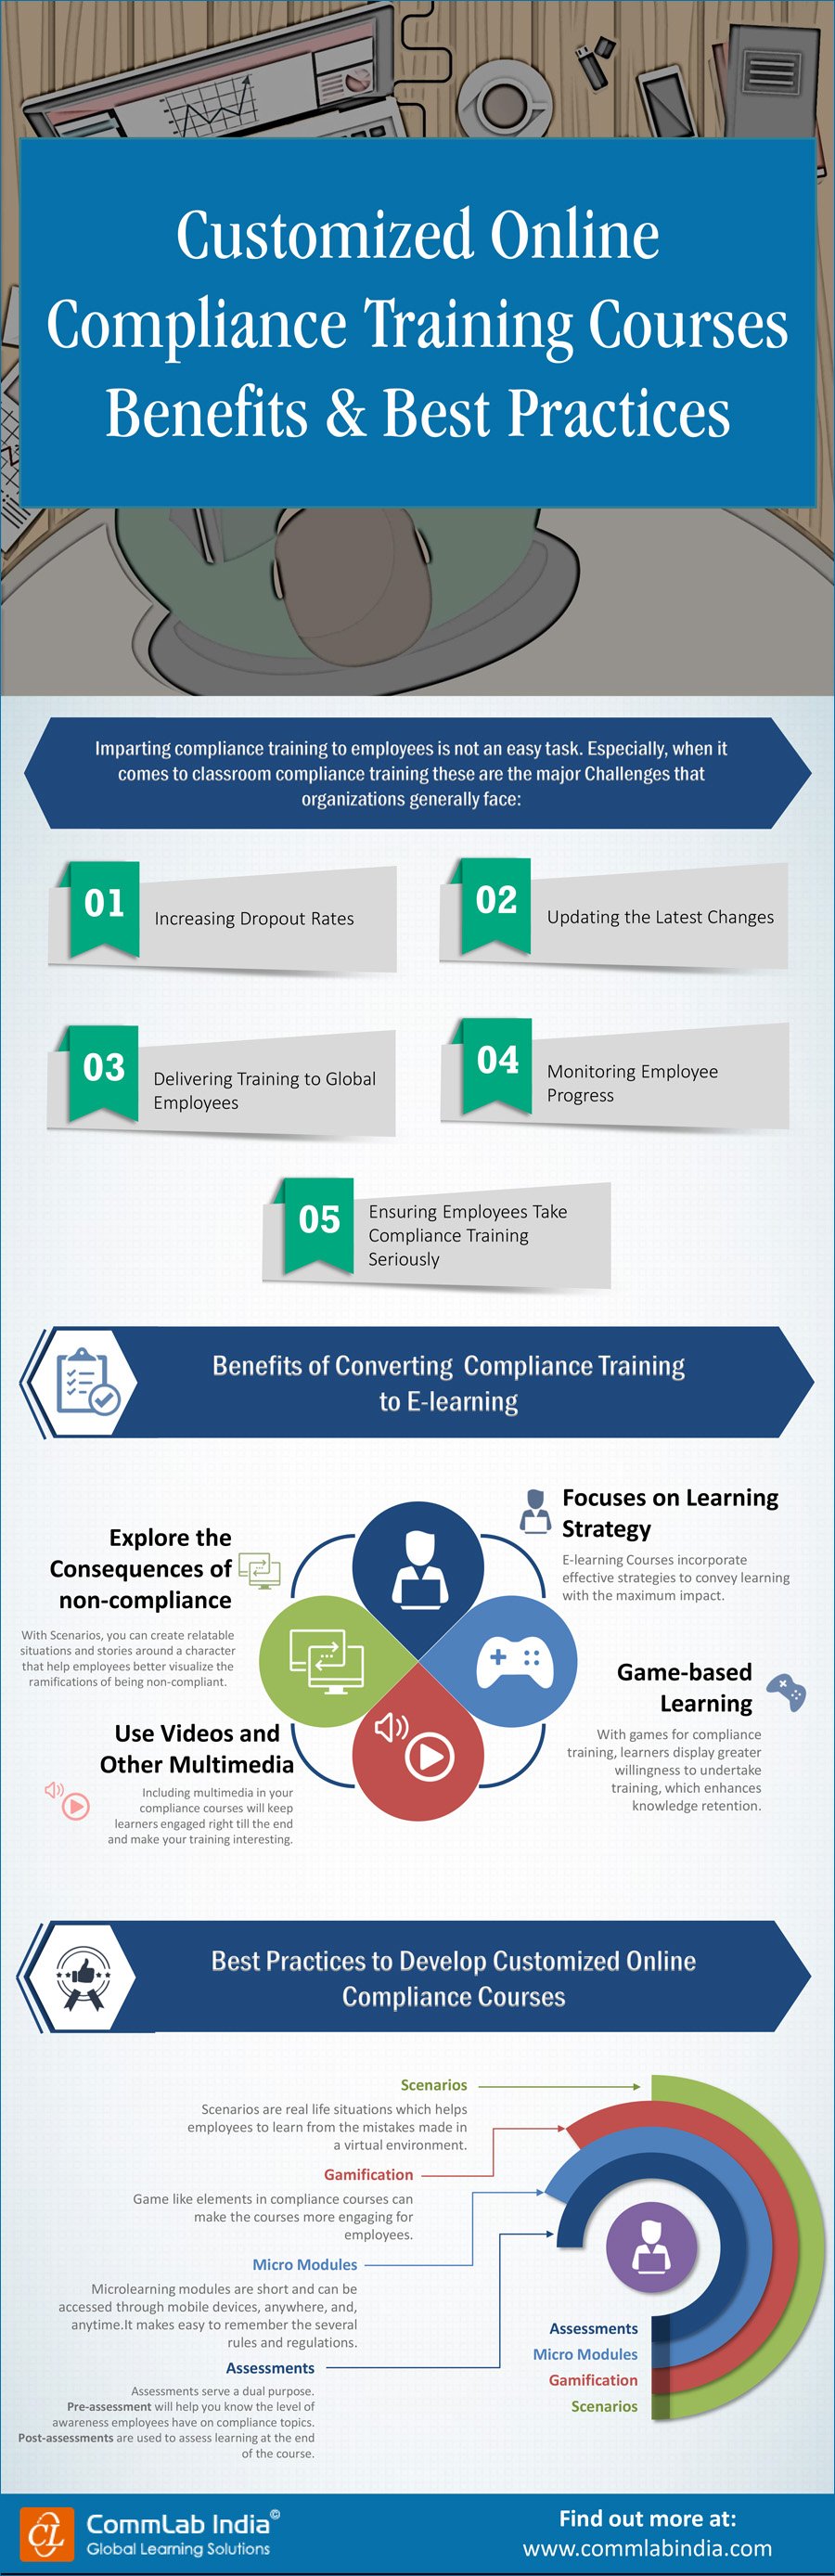 Customized Online Compliance Training Courses Benefits and Best Practices [Infographic]